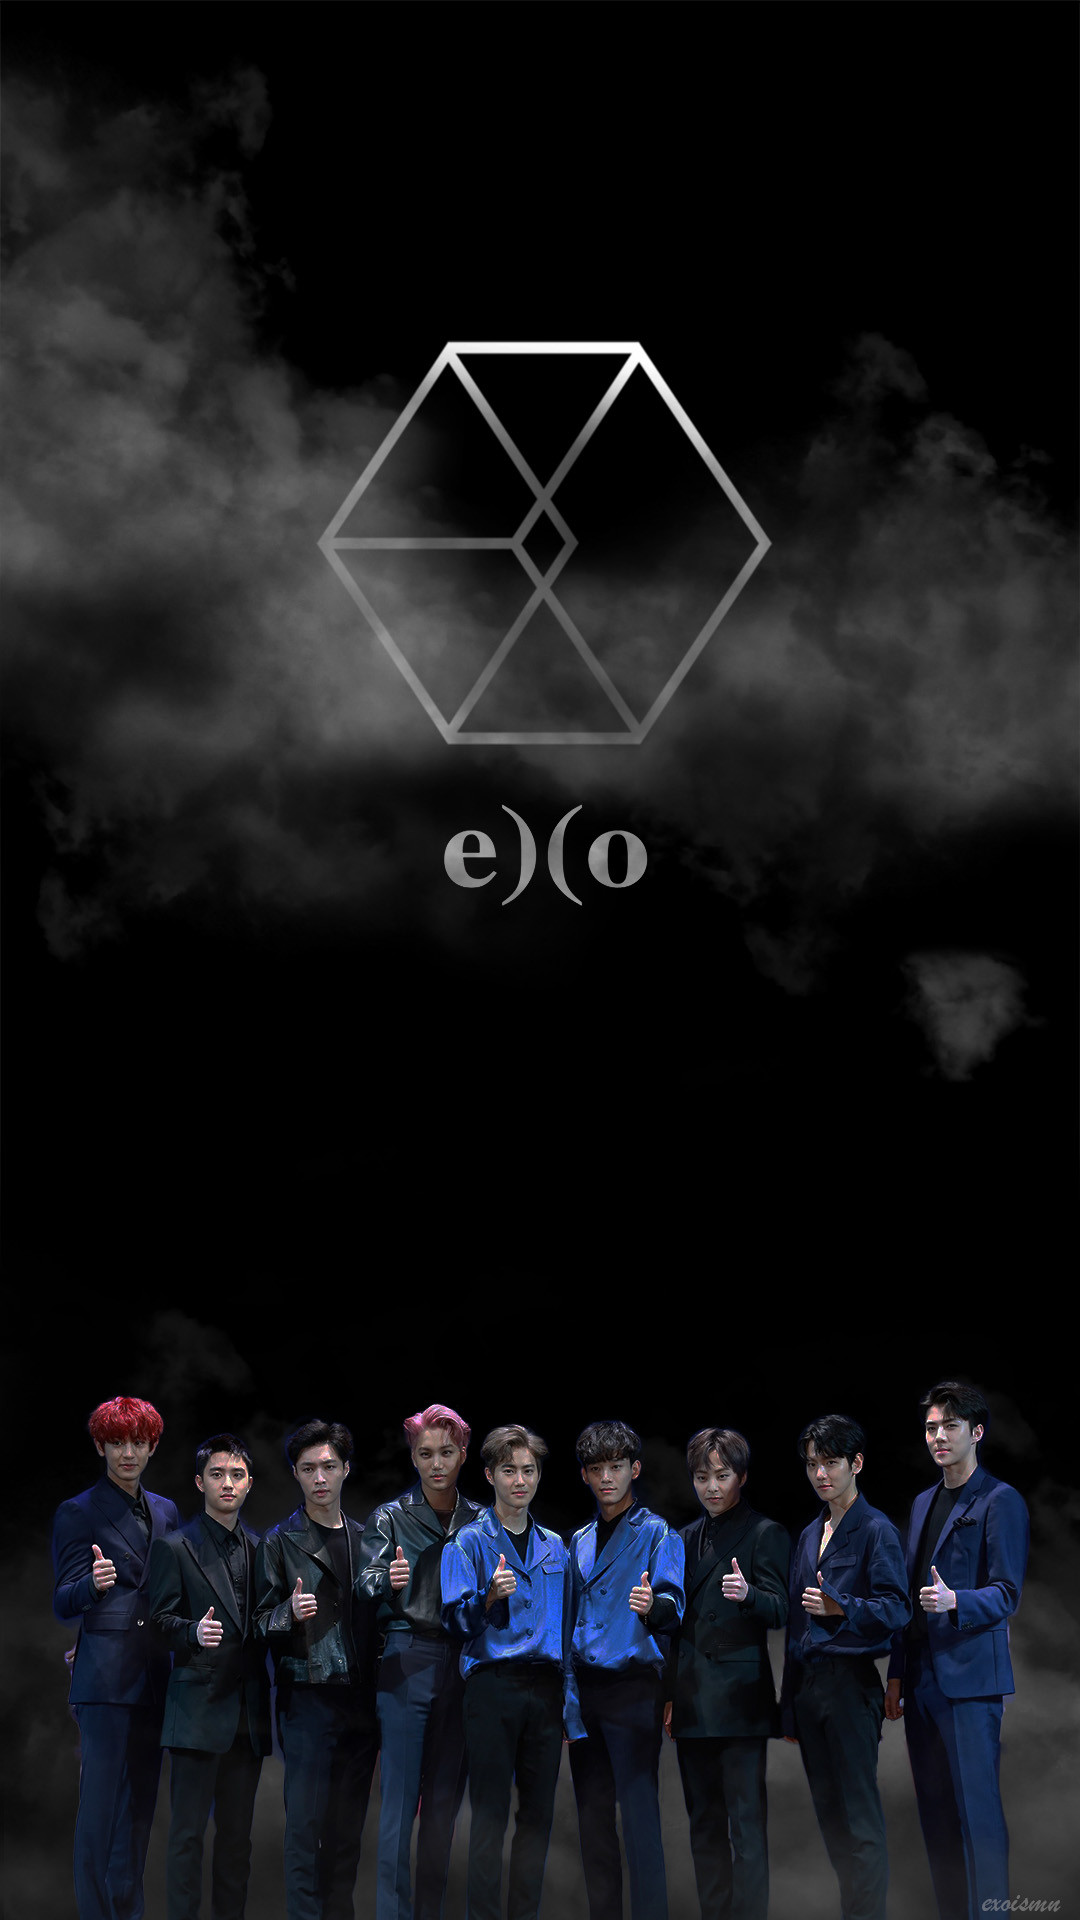 Get free high quality HD wallpapers exo iphone wallpaper livejournal